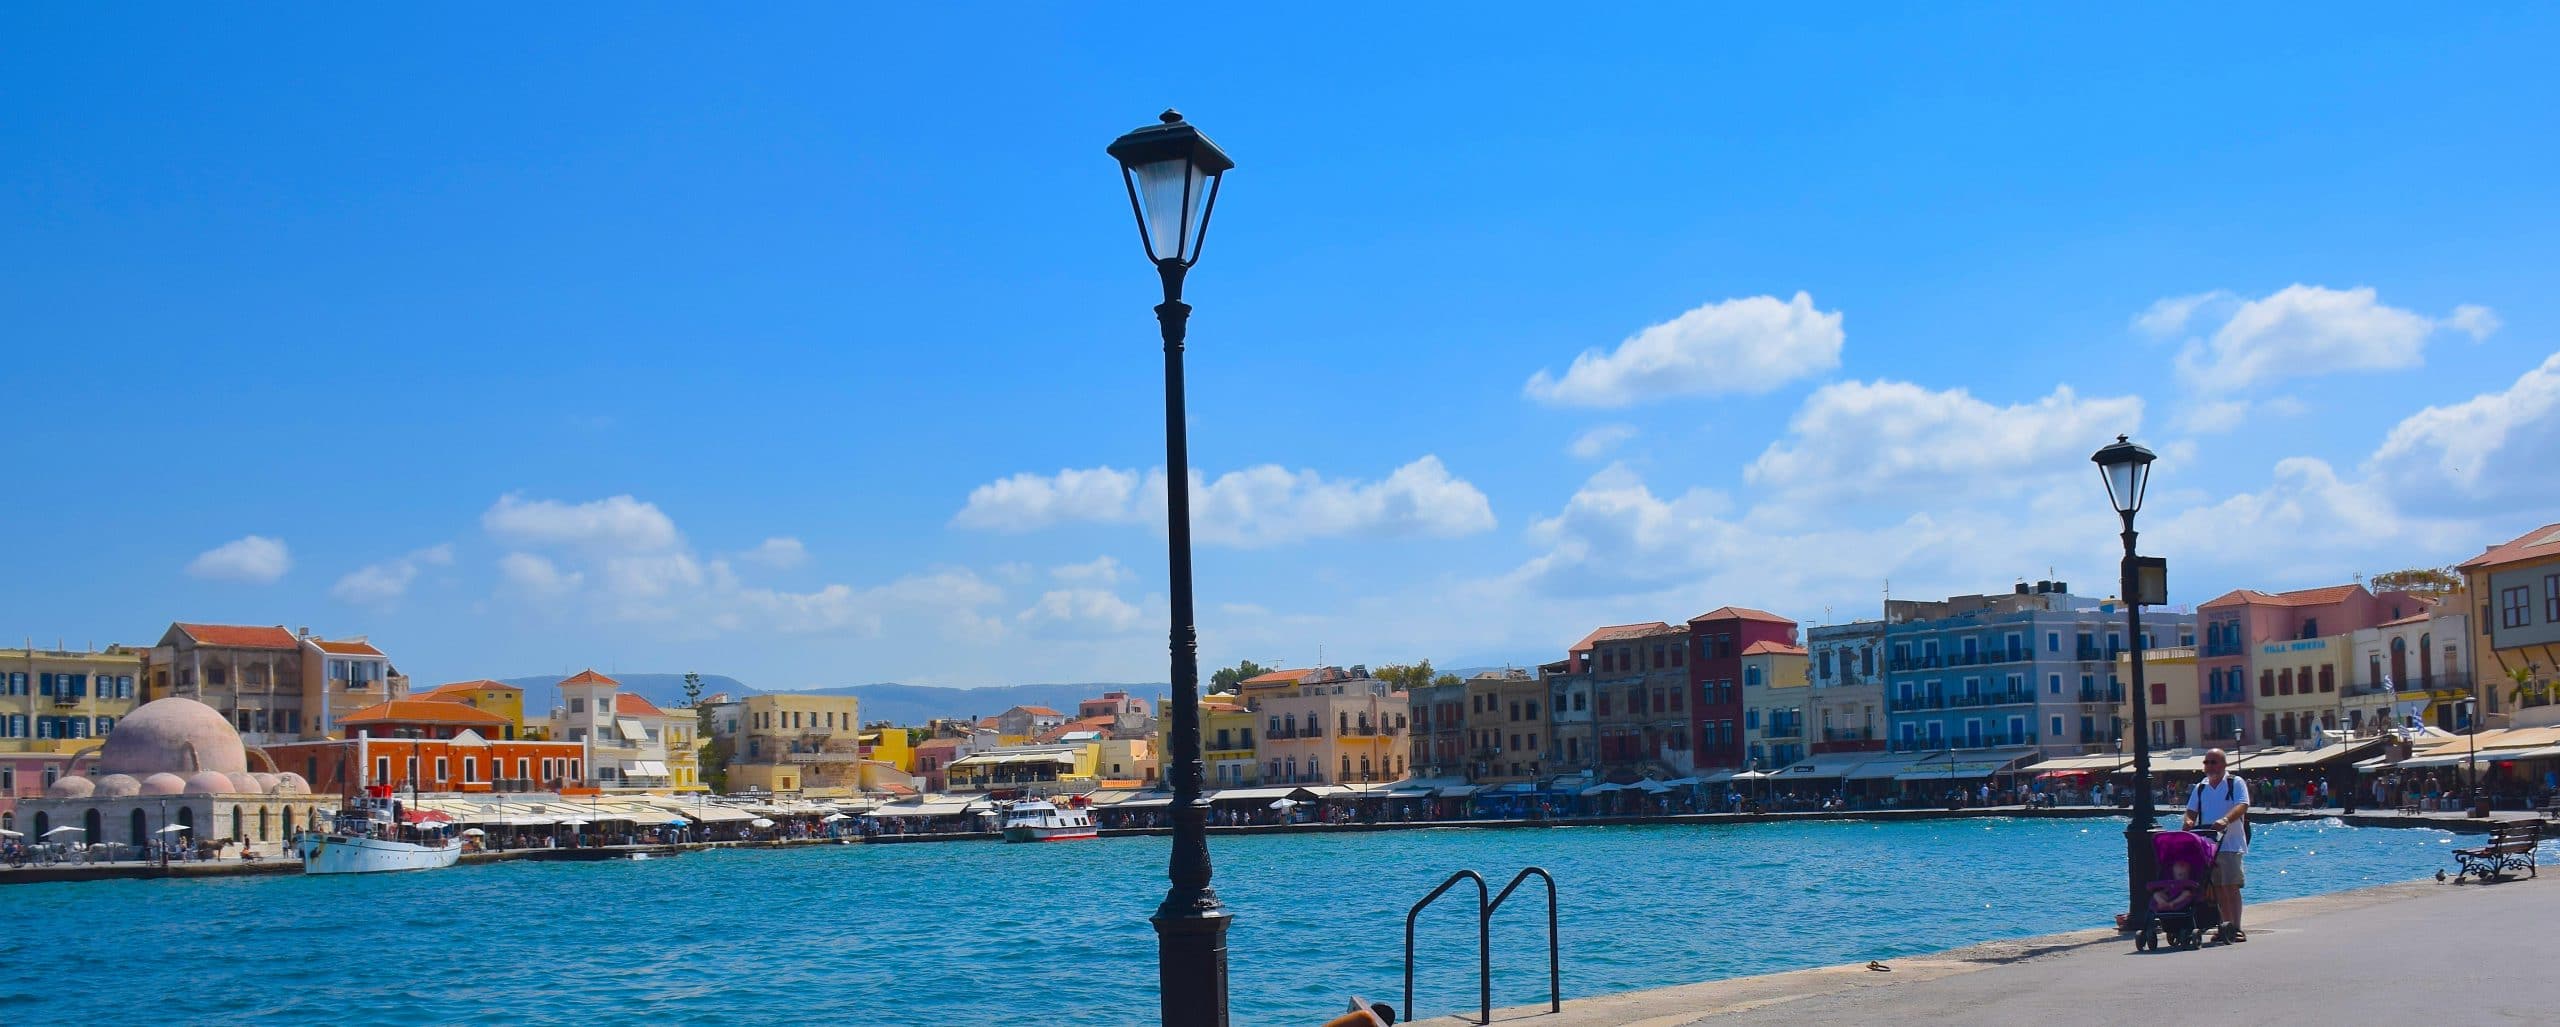 panoramic of Chania's Medieval Harbor, ringed by restaurants